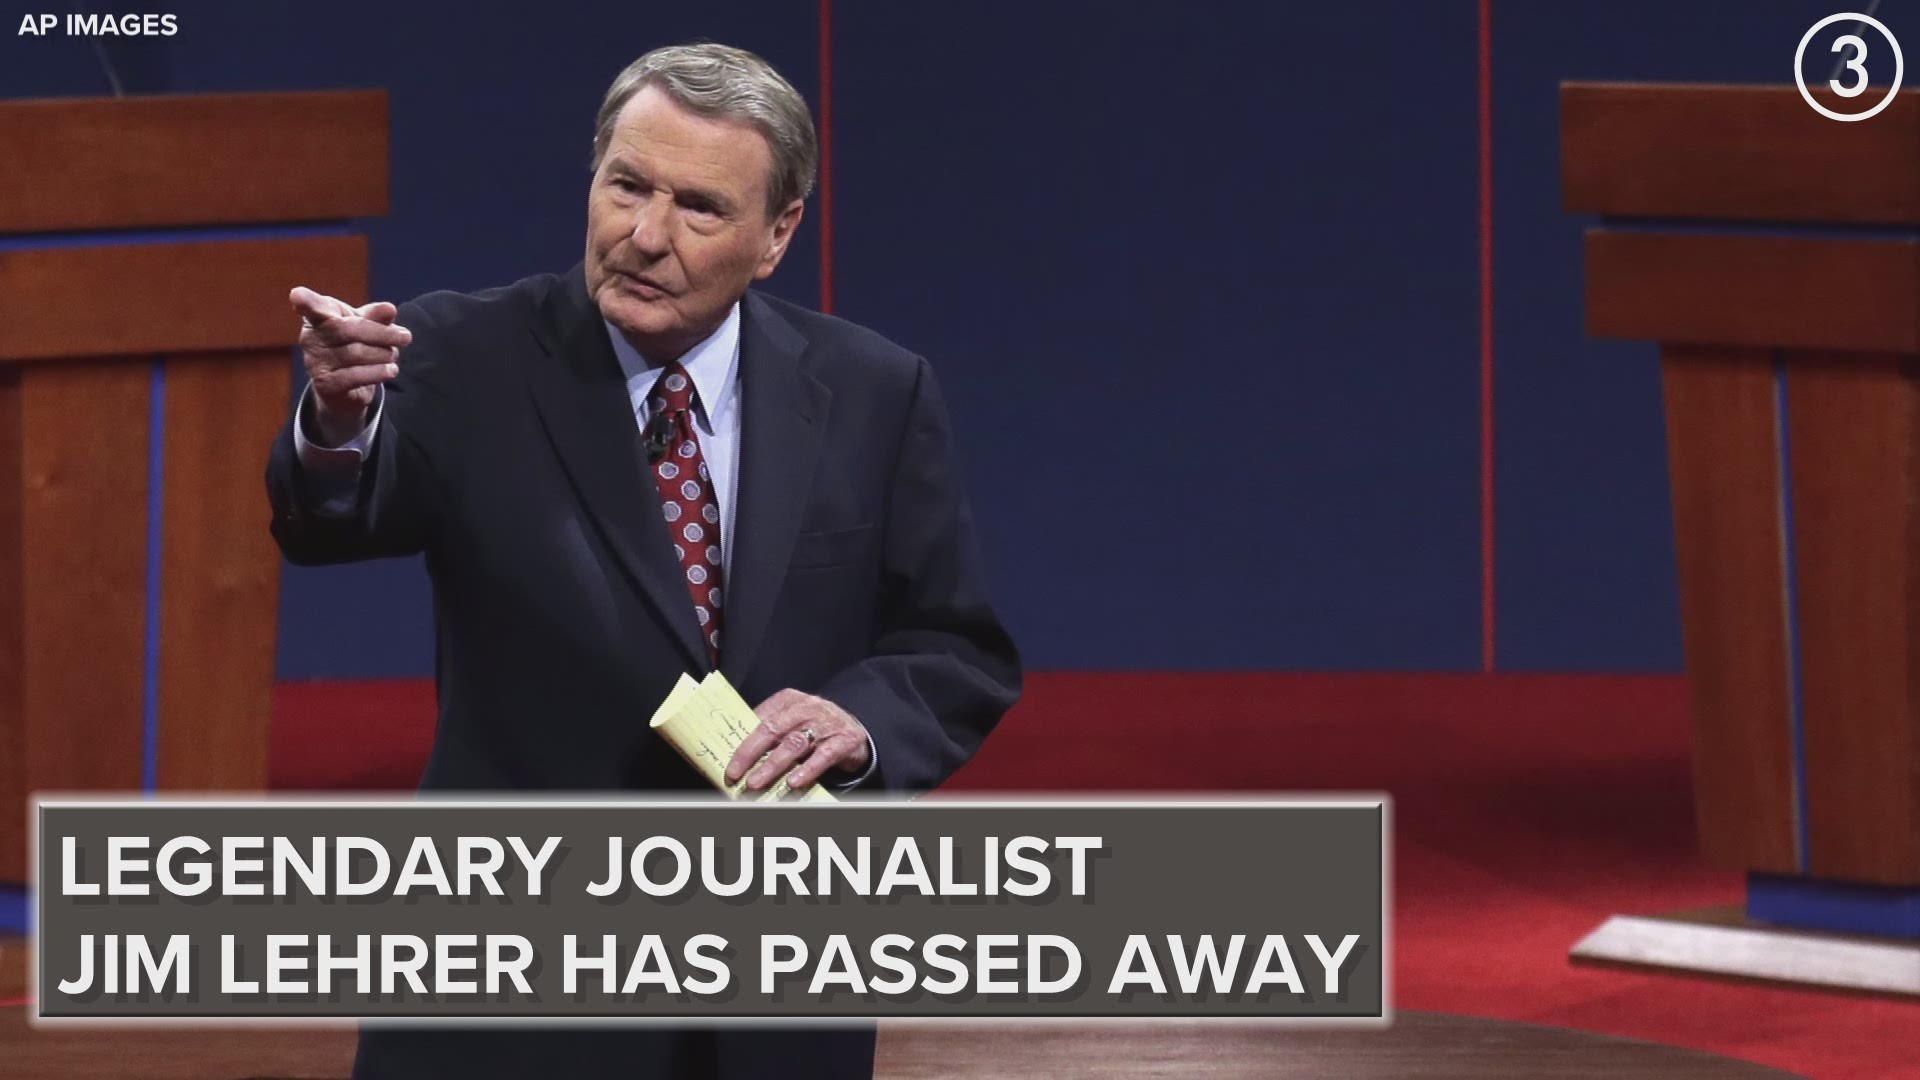 A legend in journalism has died.  For 36 years, Jim Lehrer served as the anchor of PBS NewsHour.